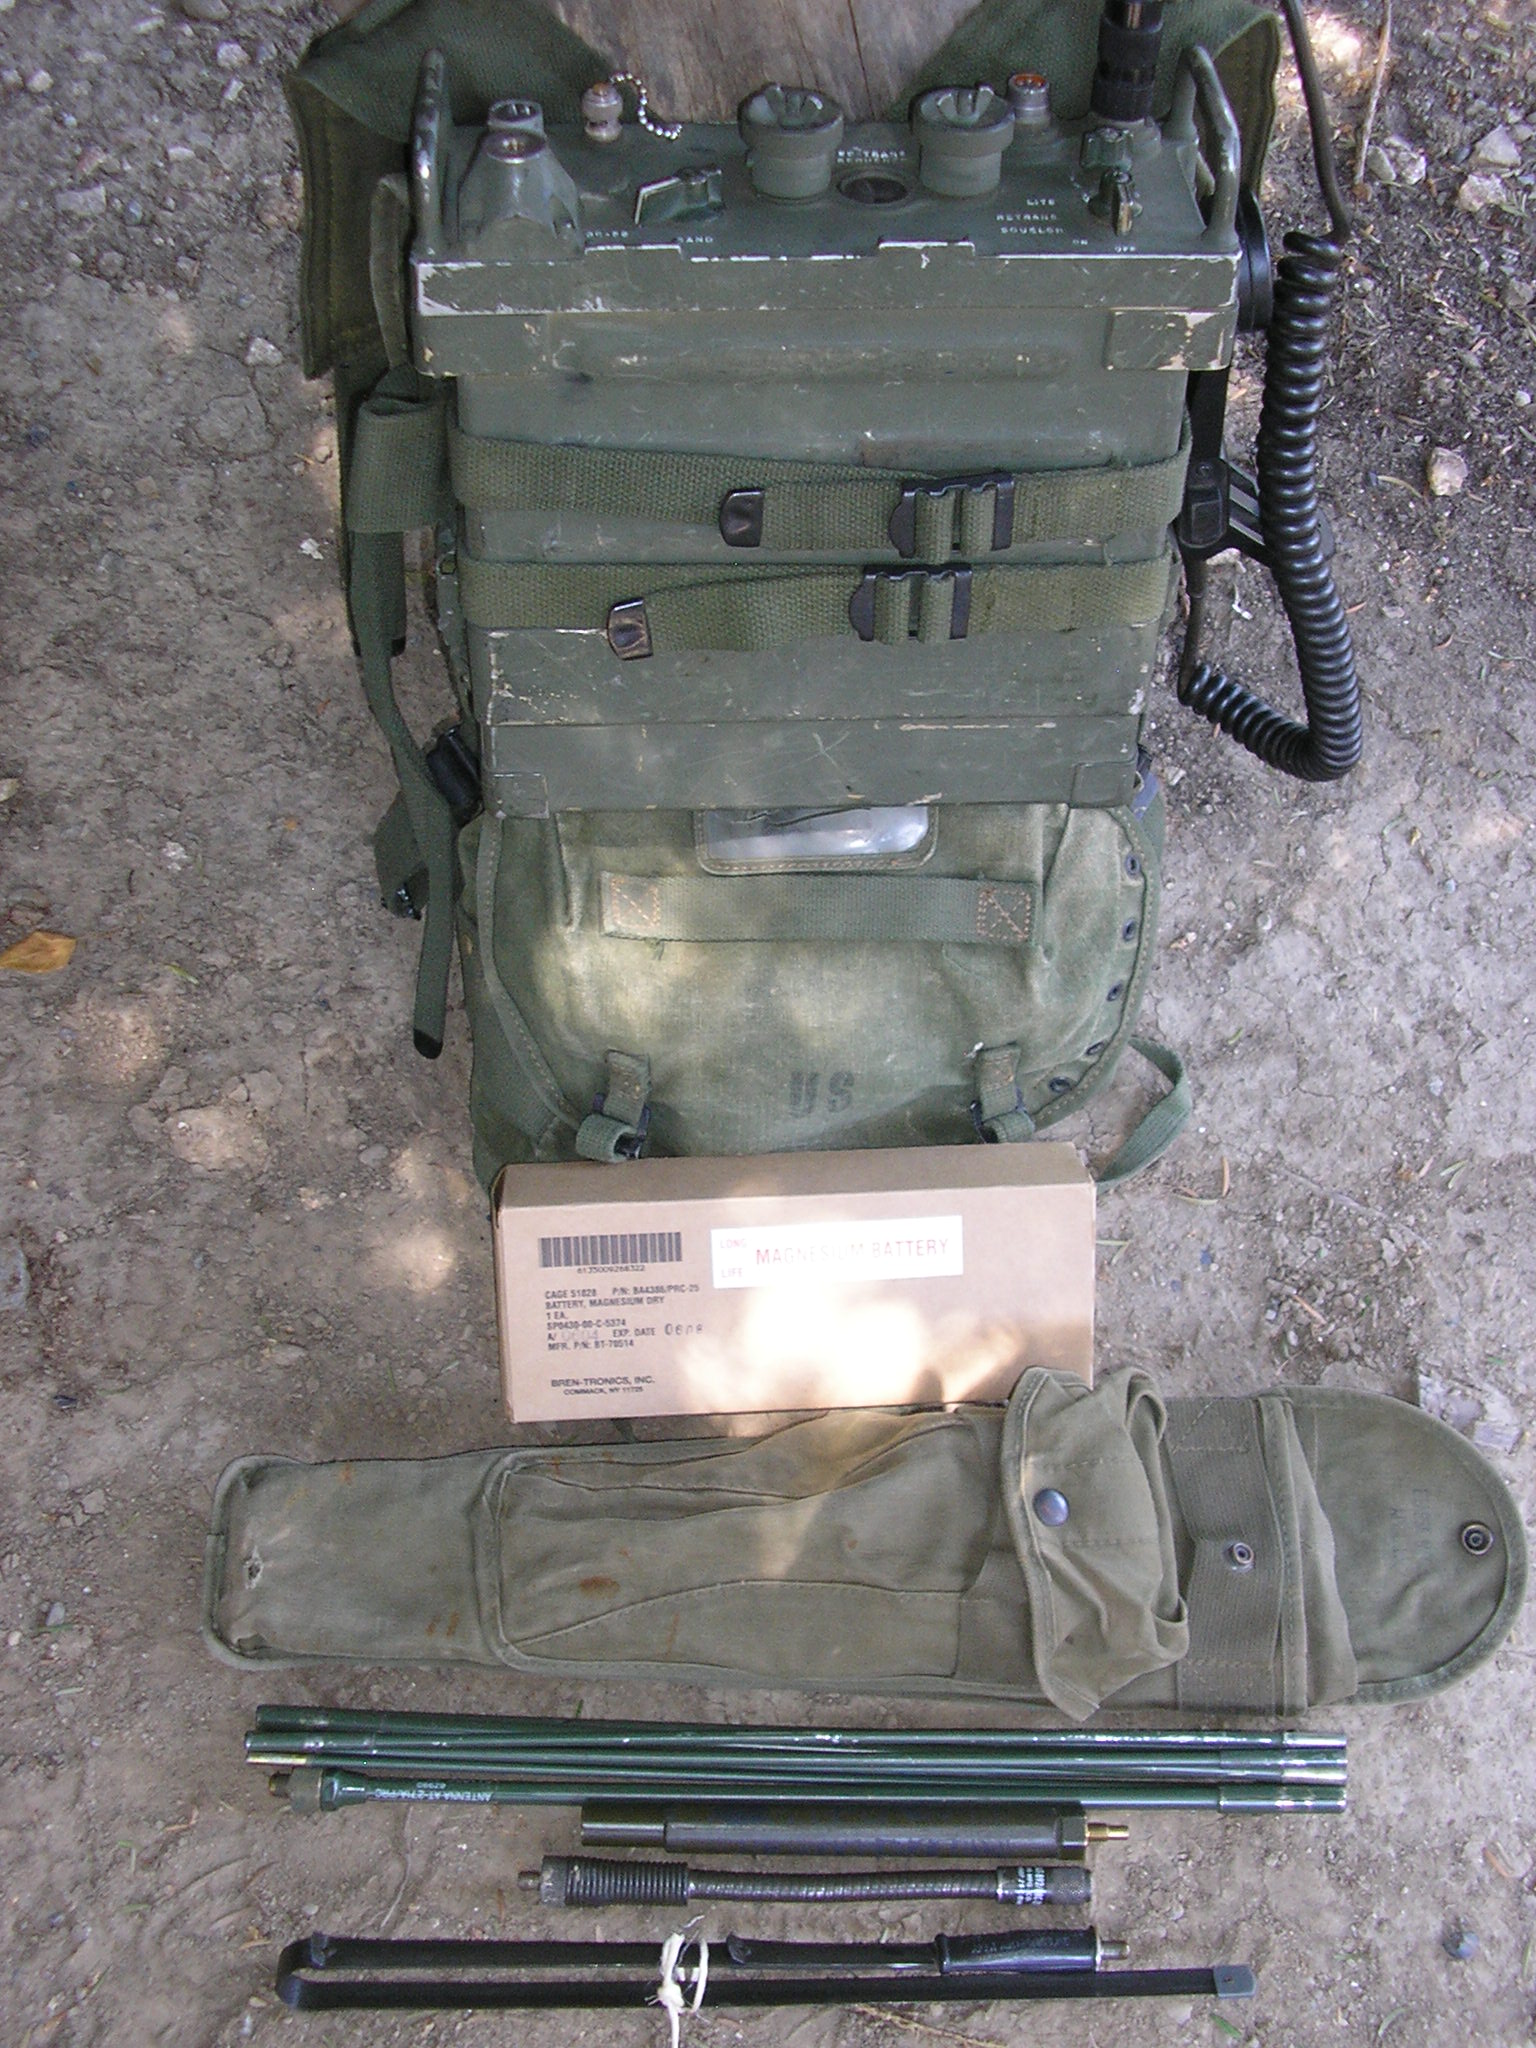 PRC-25 in harness with accesories